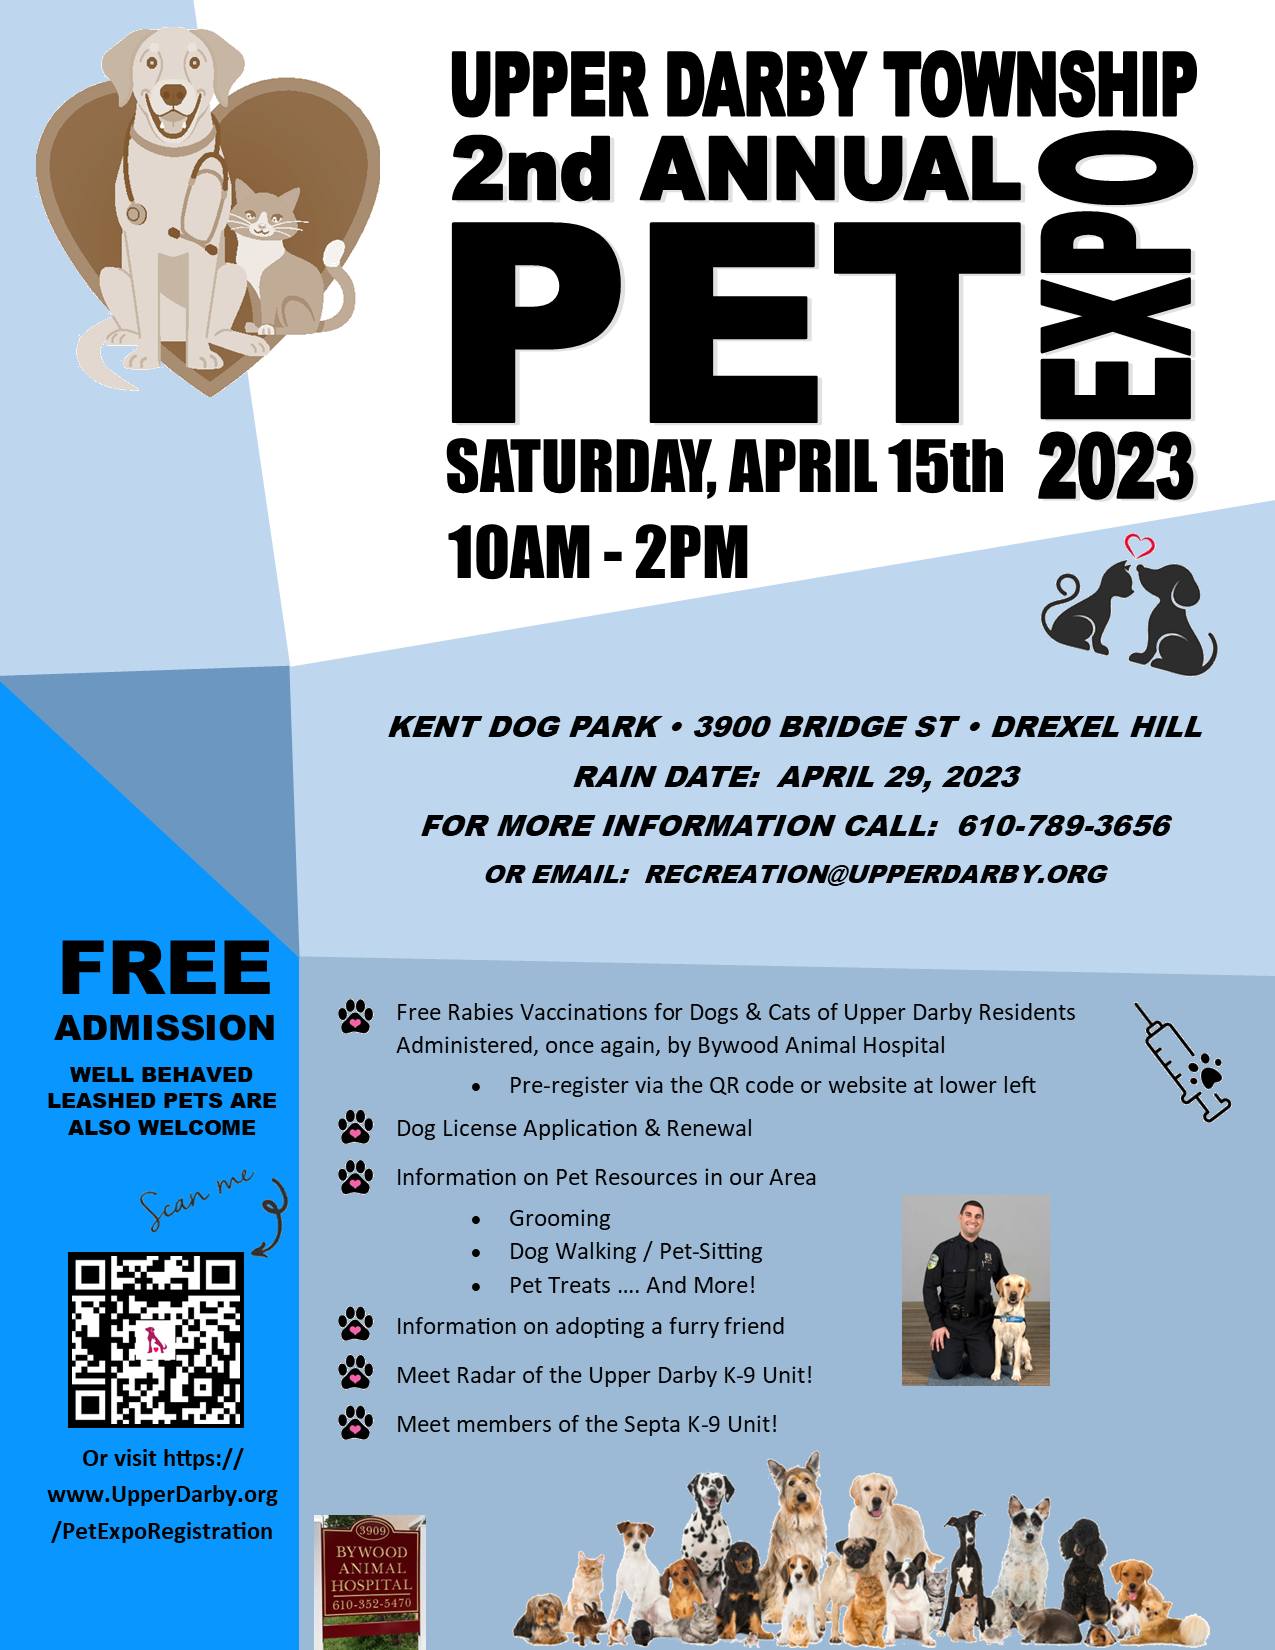 2023 Pet Expo Poster - Images are omitted